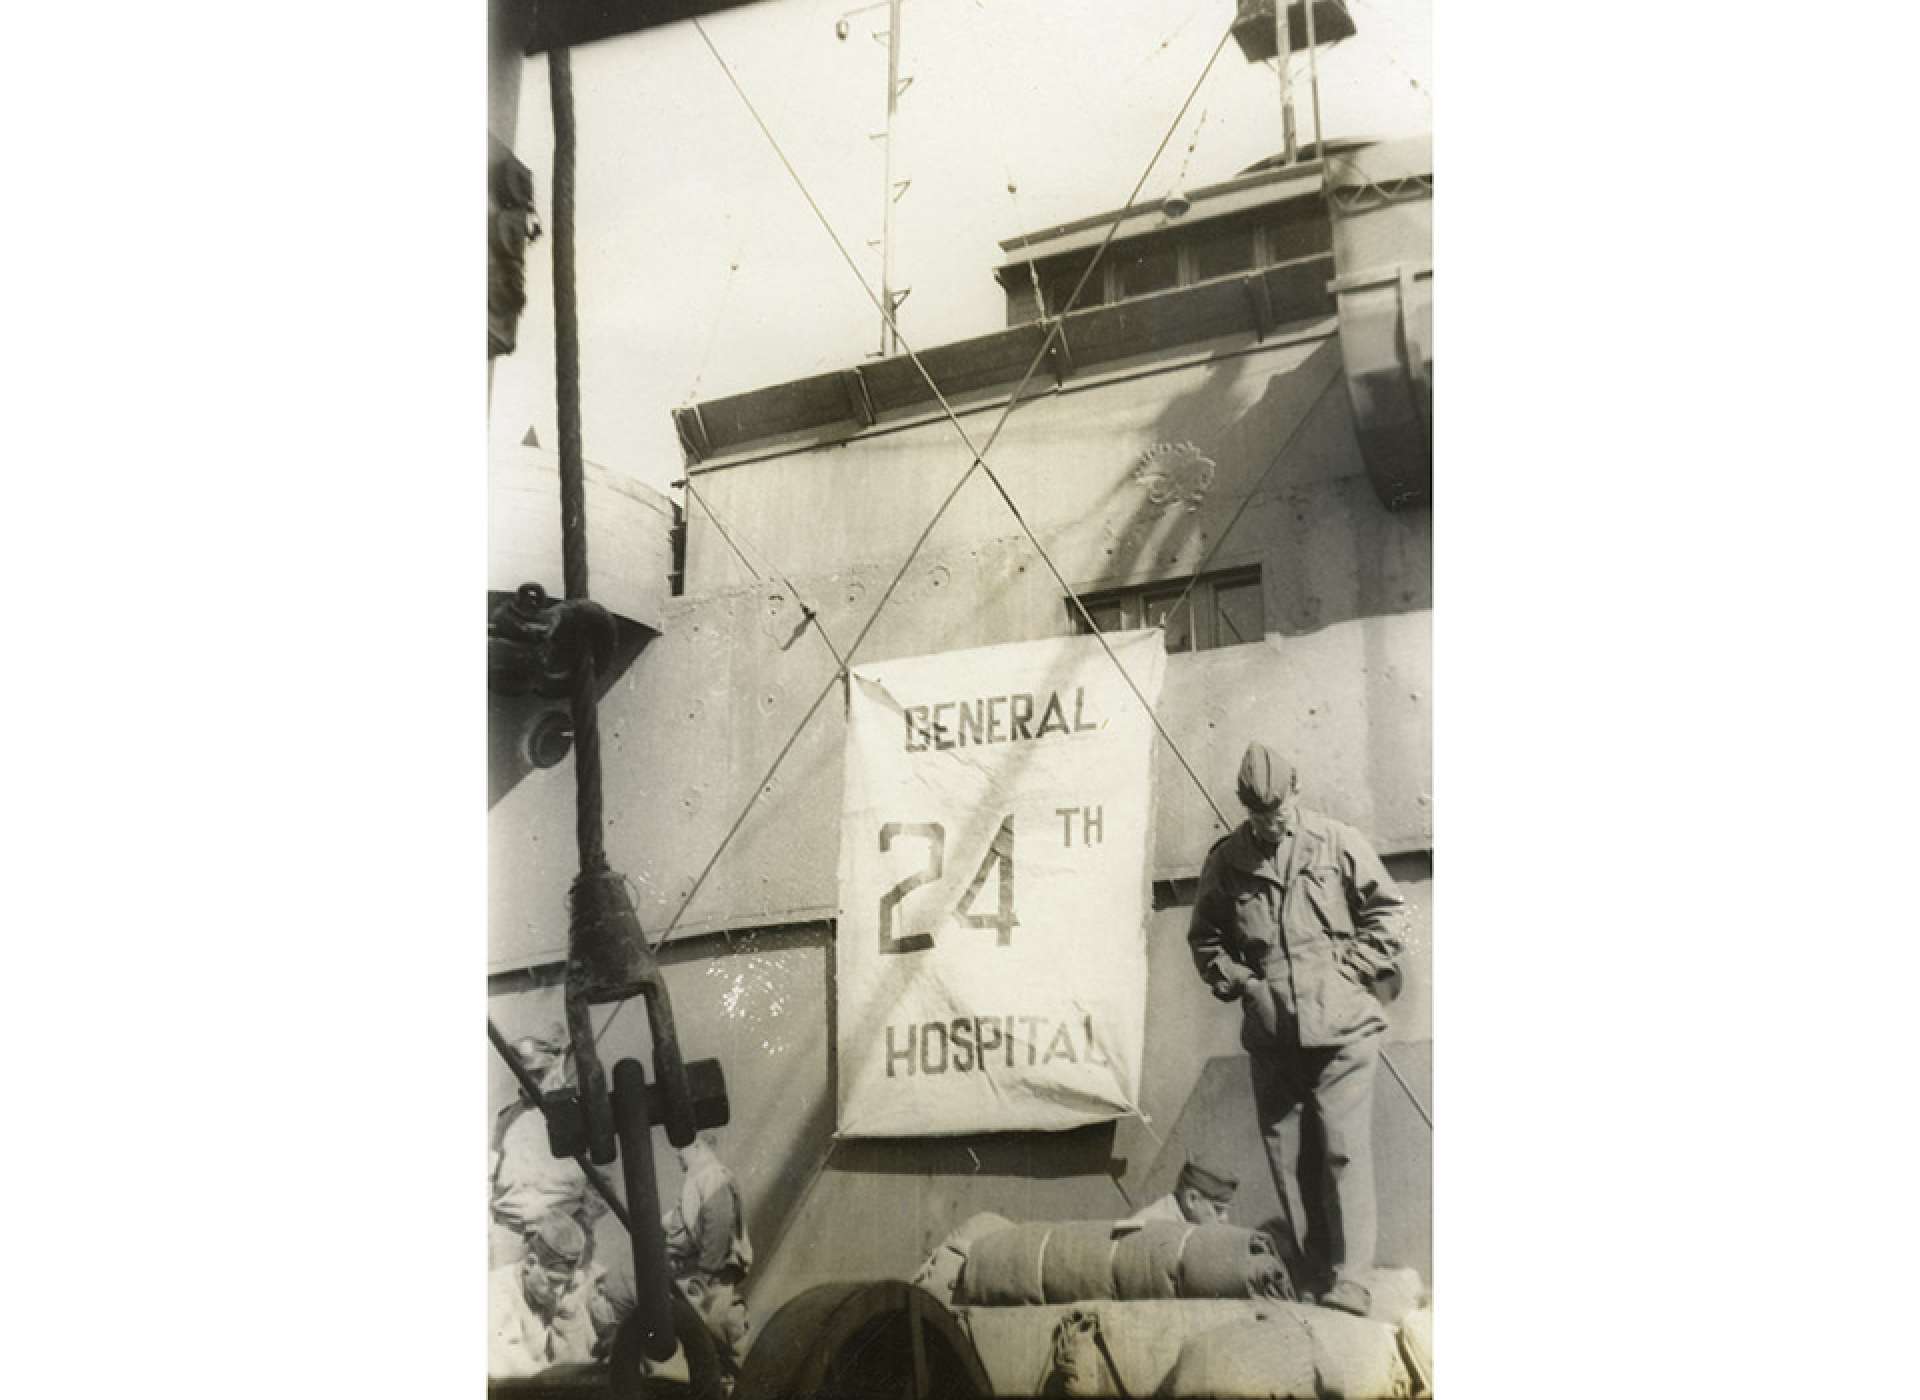 Returning home! Men of the 24th General Hospital aboard the transport ship which will take them home after more than 2 years away. They left Italy on October 11, 1945. The National WWII Museum.